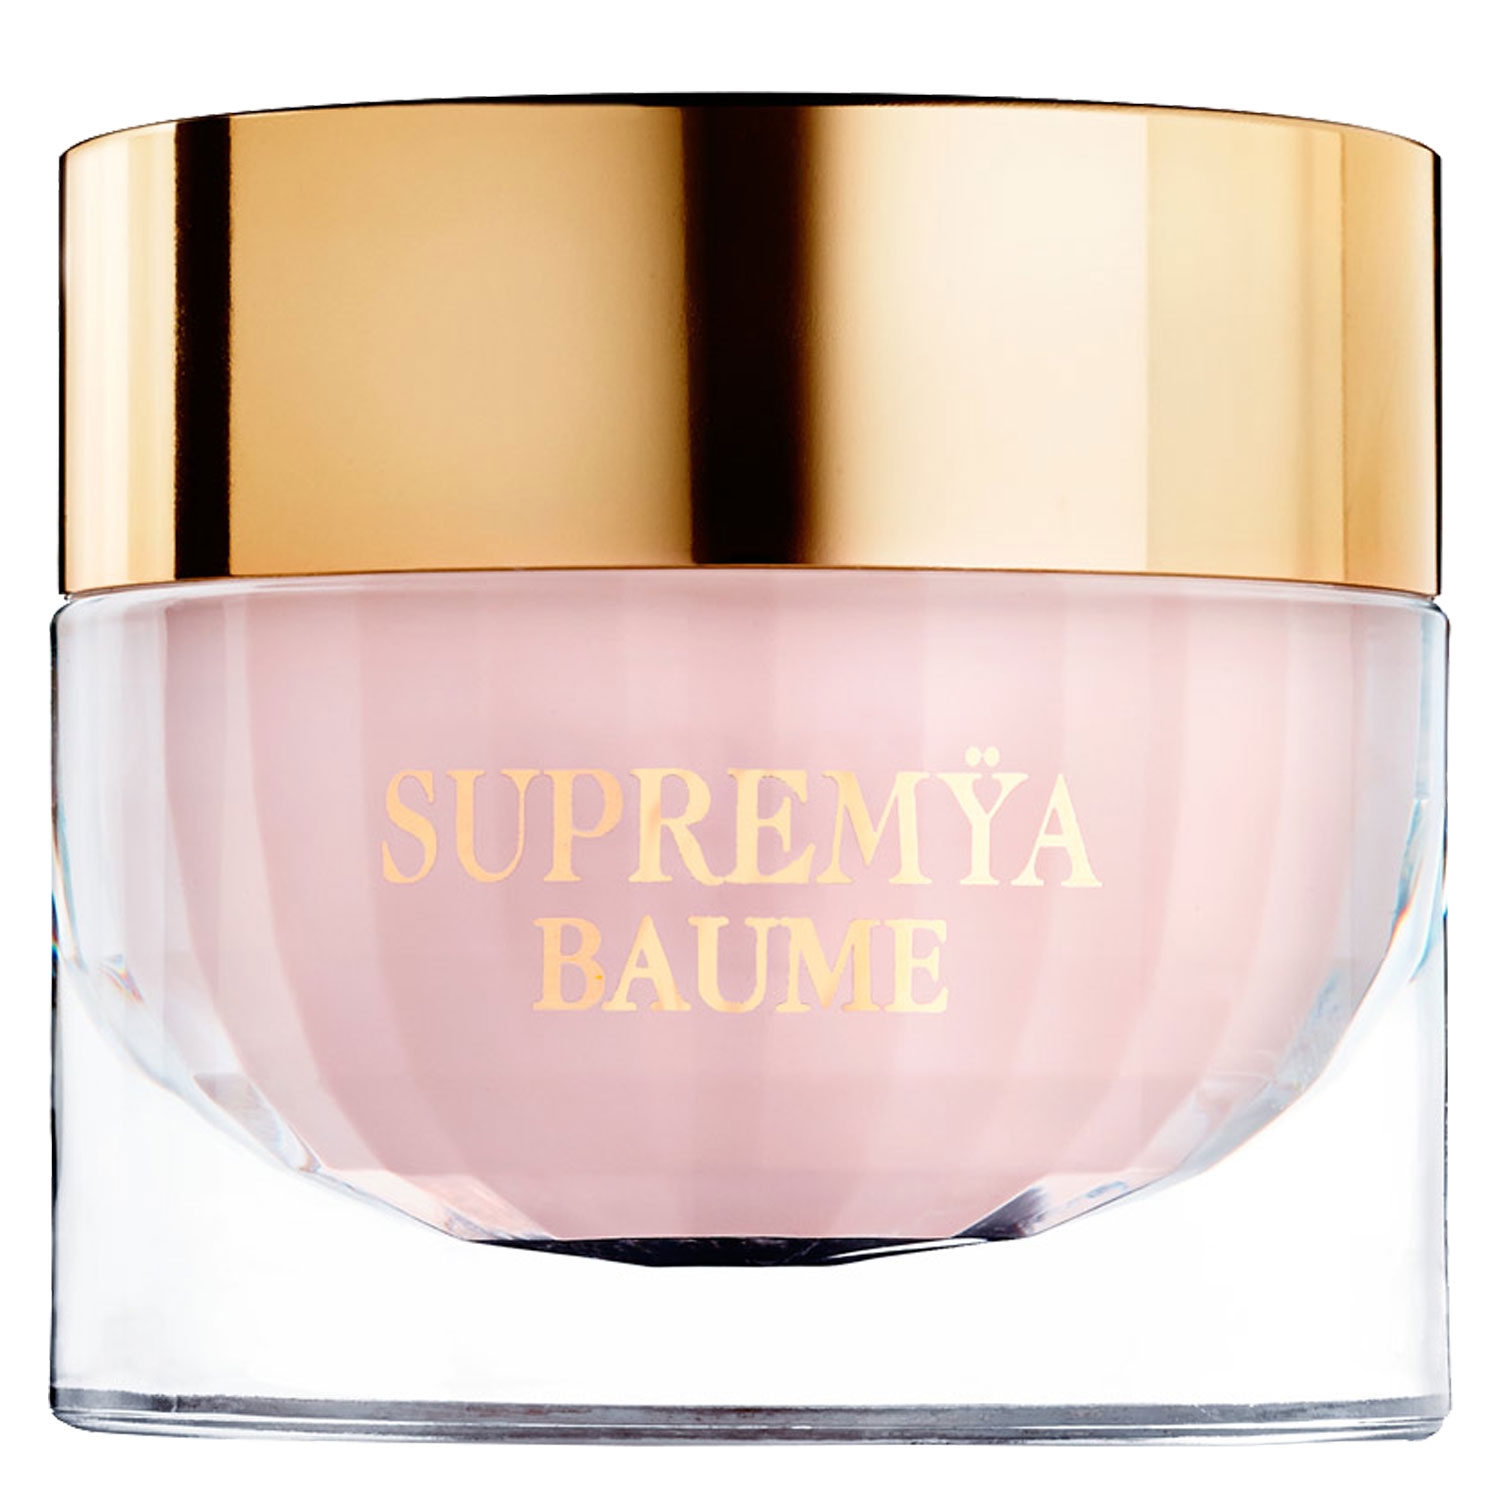 Product image from Supremÿa - Baume La Nuit Le Grand Soin Anti-Age